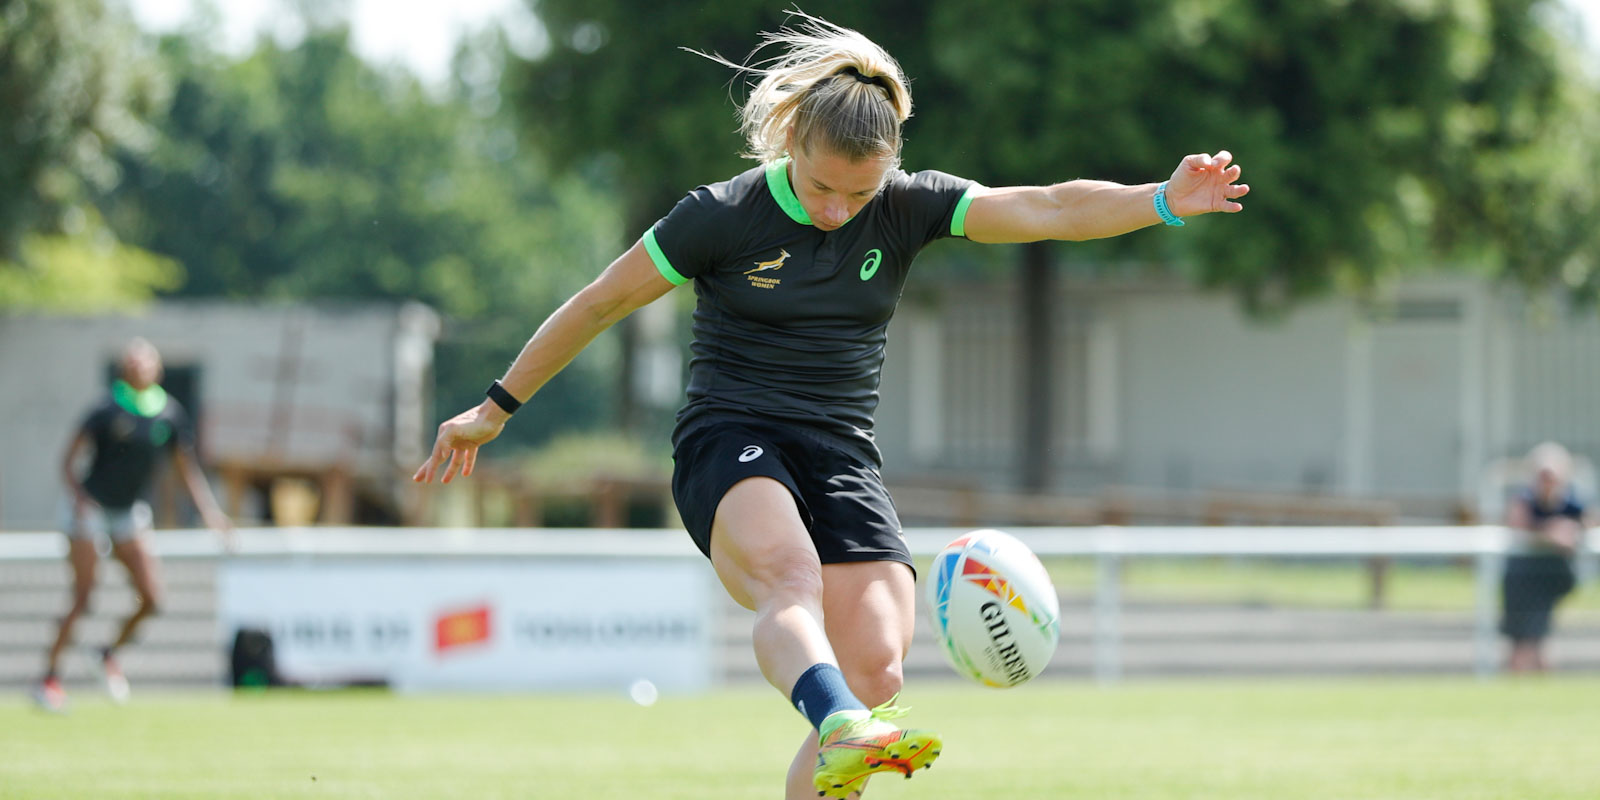 Roos had to add kicking to her skills set when she moved to XV's rugby.